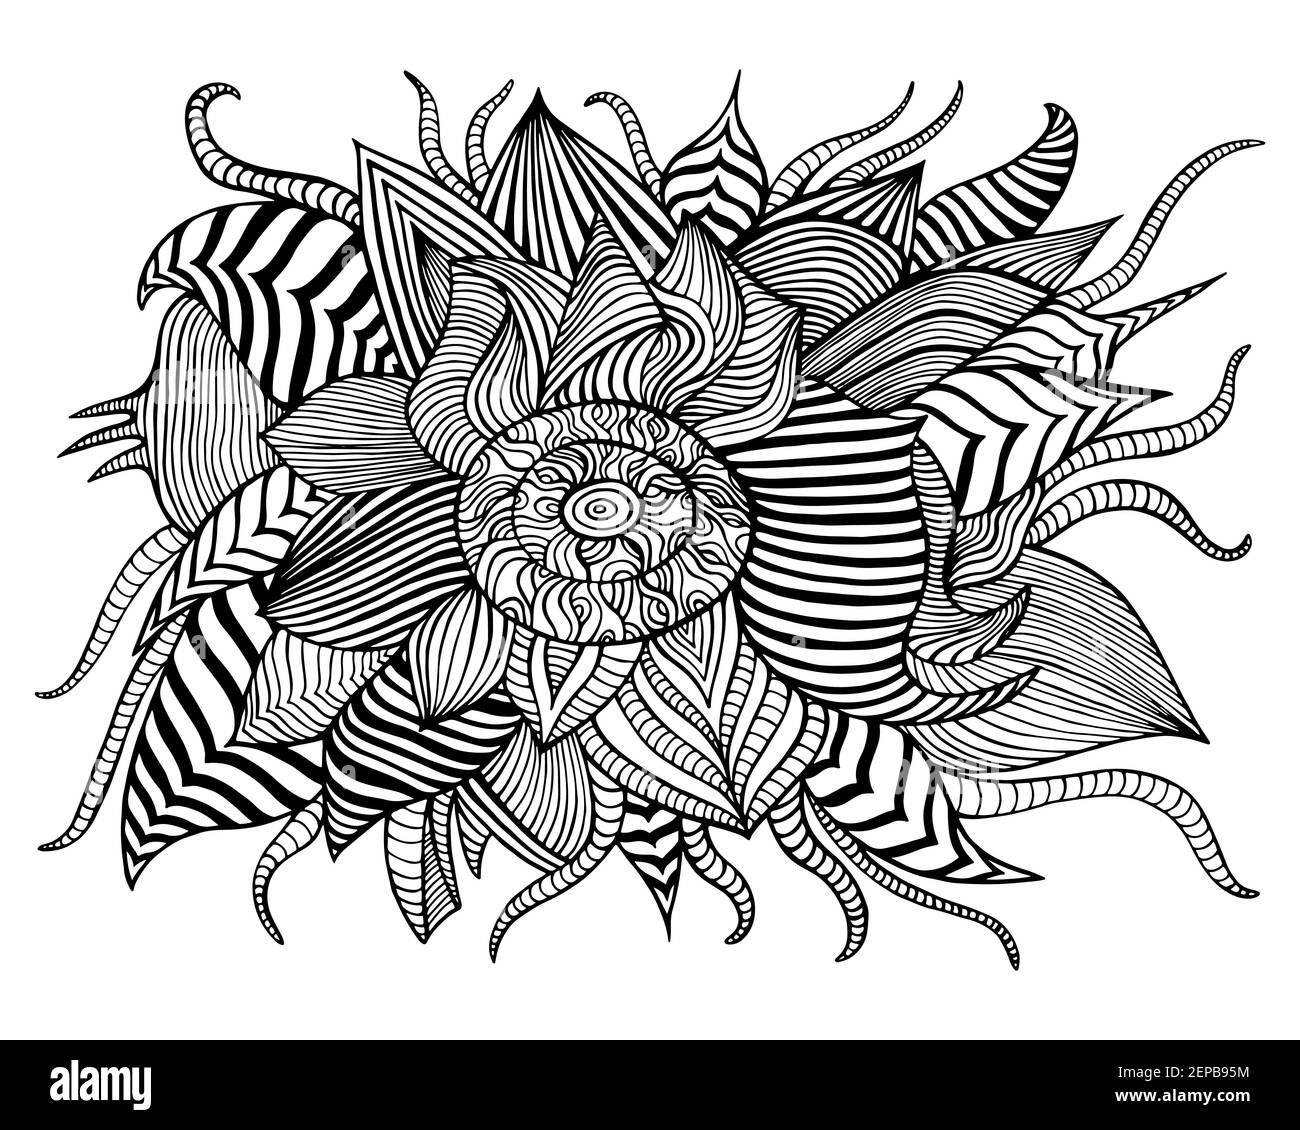 Surreal fantastic abstract flower with many patterns coloring page ...